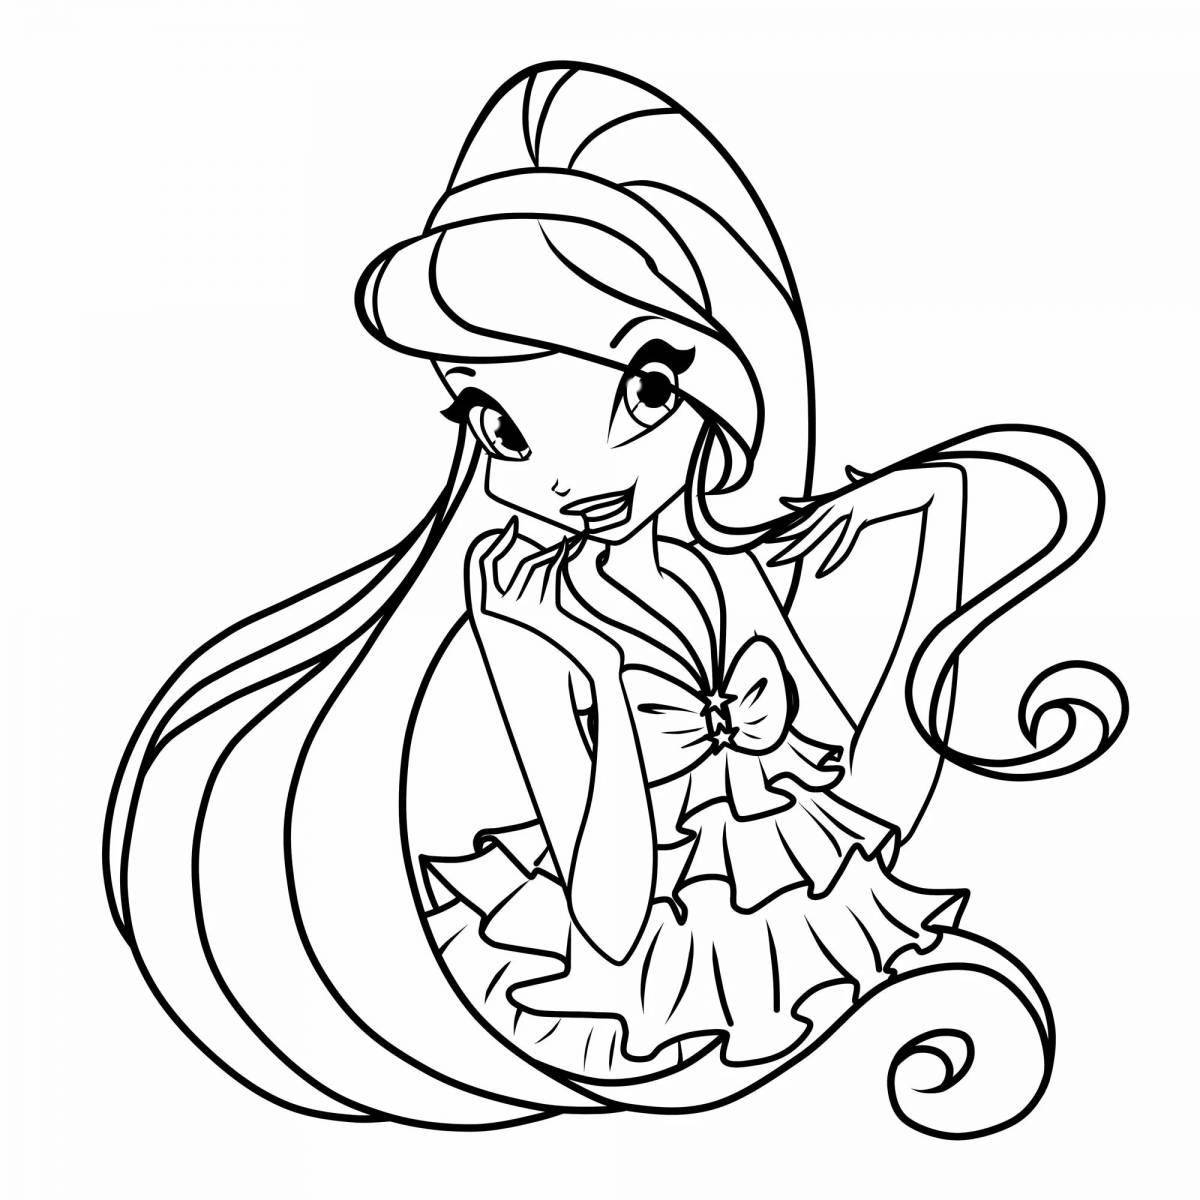 Fancy winx coloring book for kids